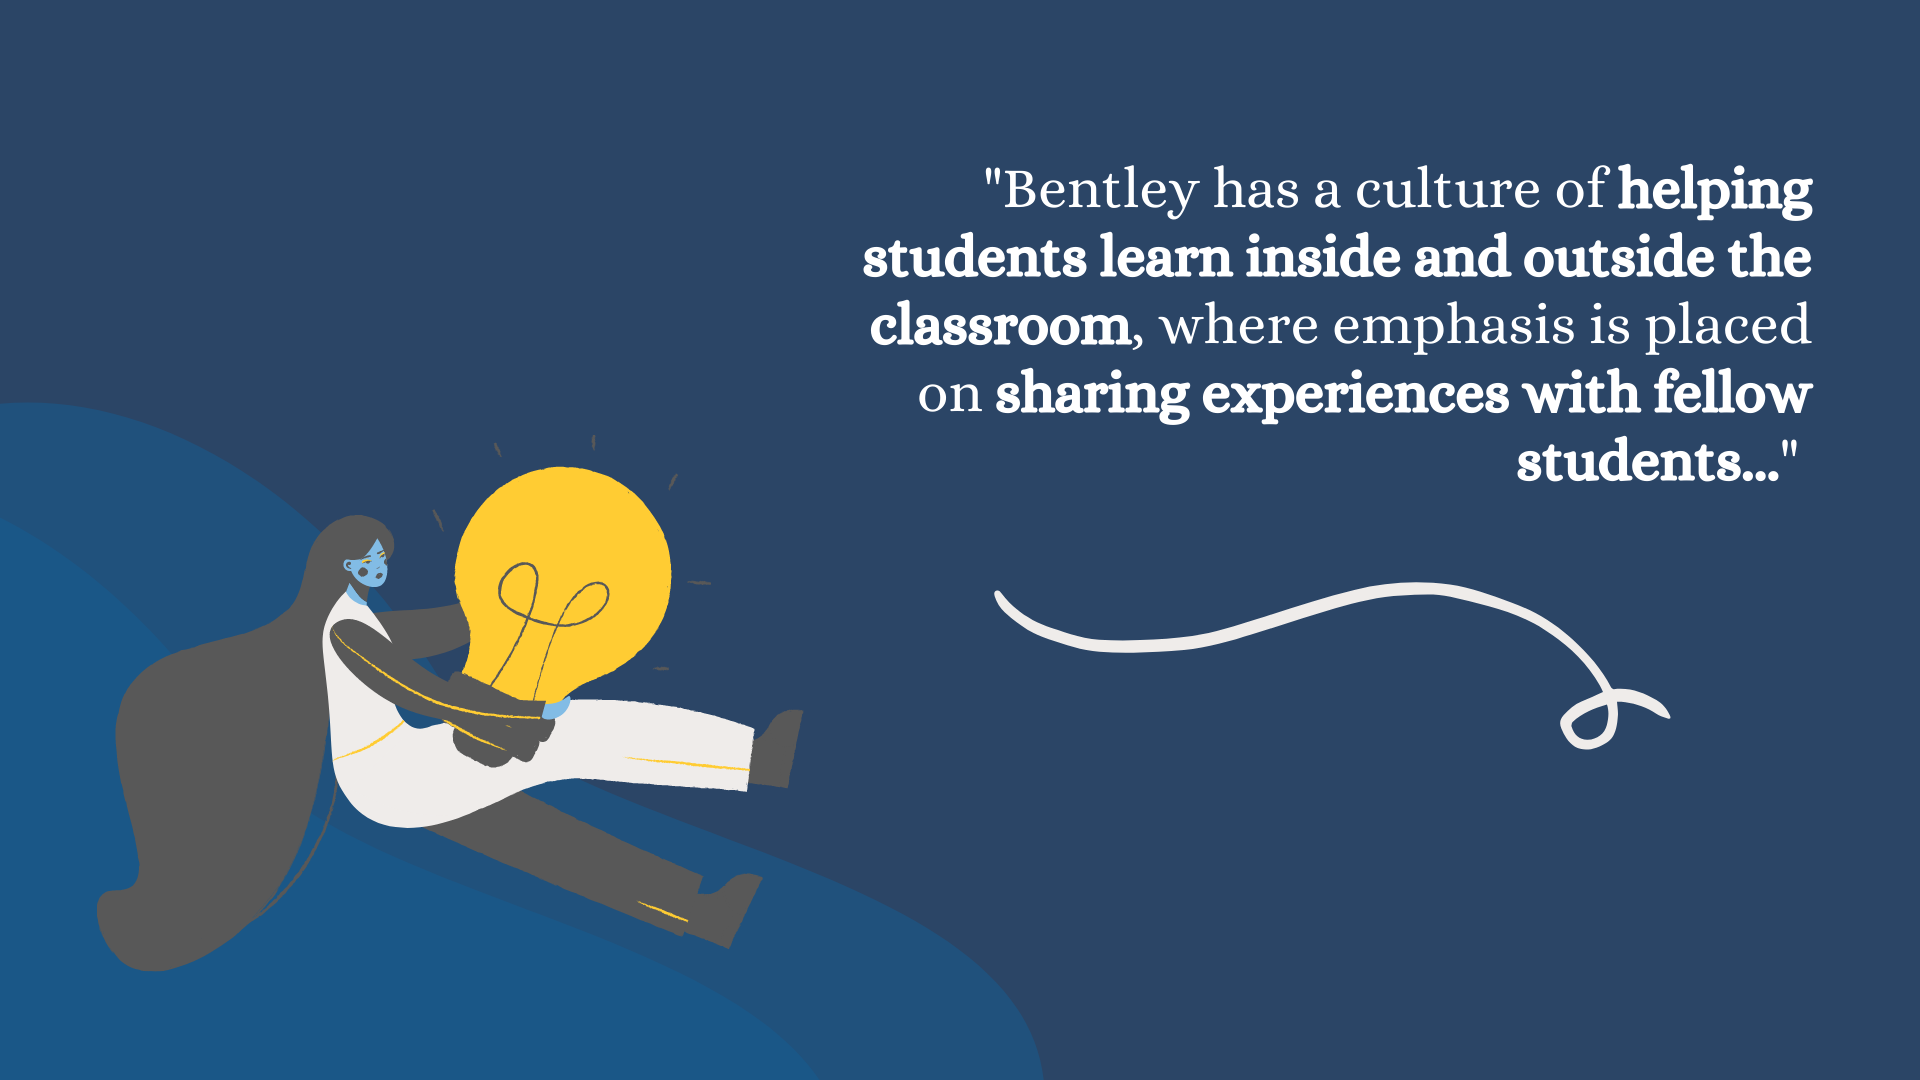 Image with the text "Bentley has a culture of helping students learn inside and outside the classroom, where emphasis is placed on sharing experiences with fellow students…."